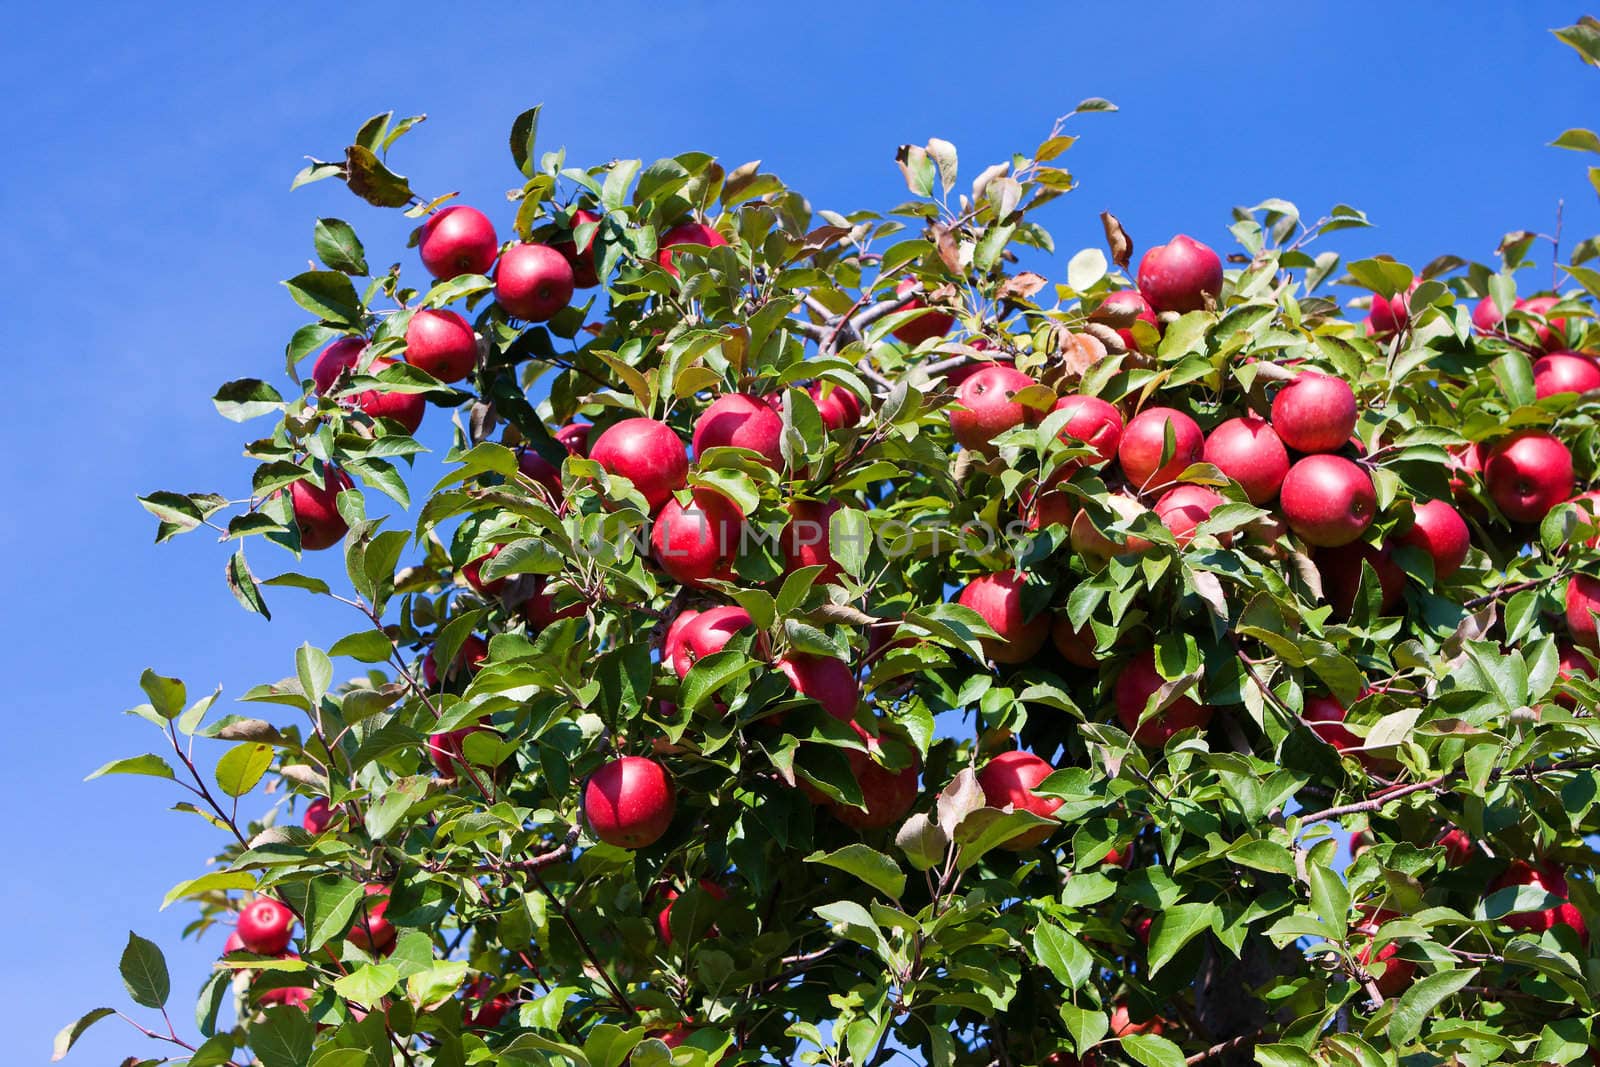 Tree Branches full of ripe red apples against blue sky.